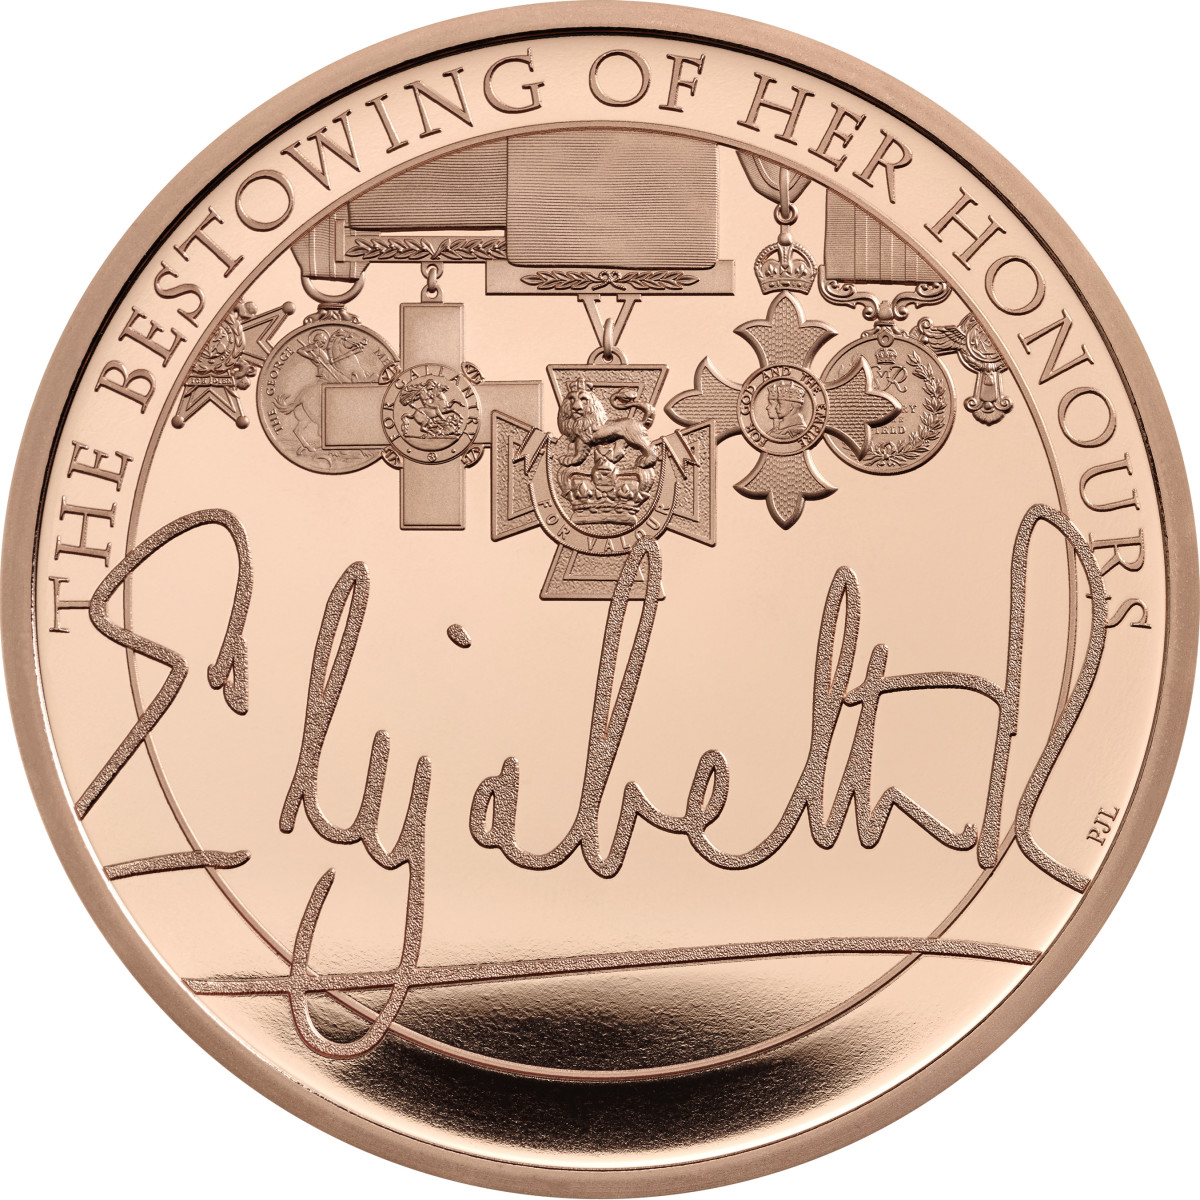 The Royal Mint’s special three-coin collection features Queen’s signature for first time